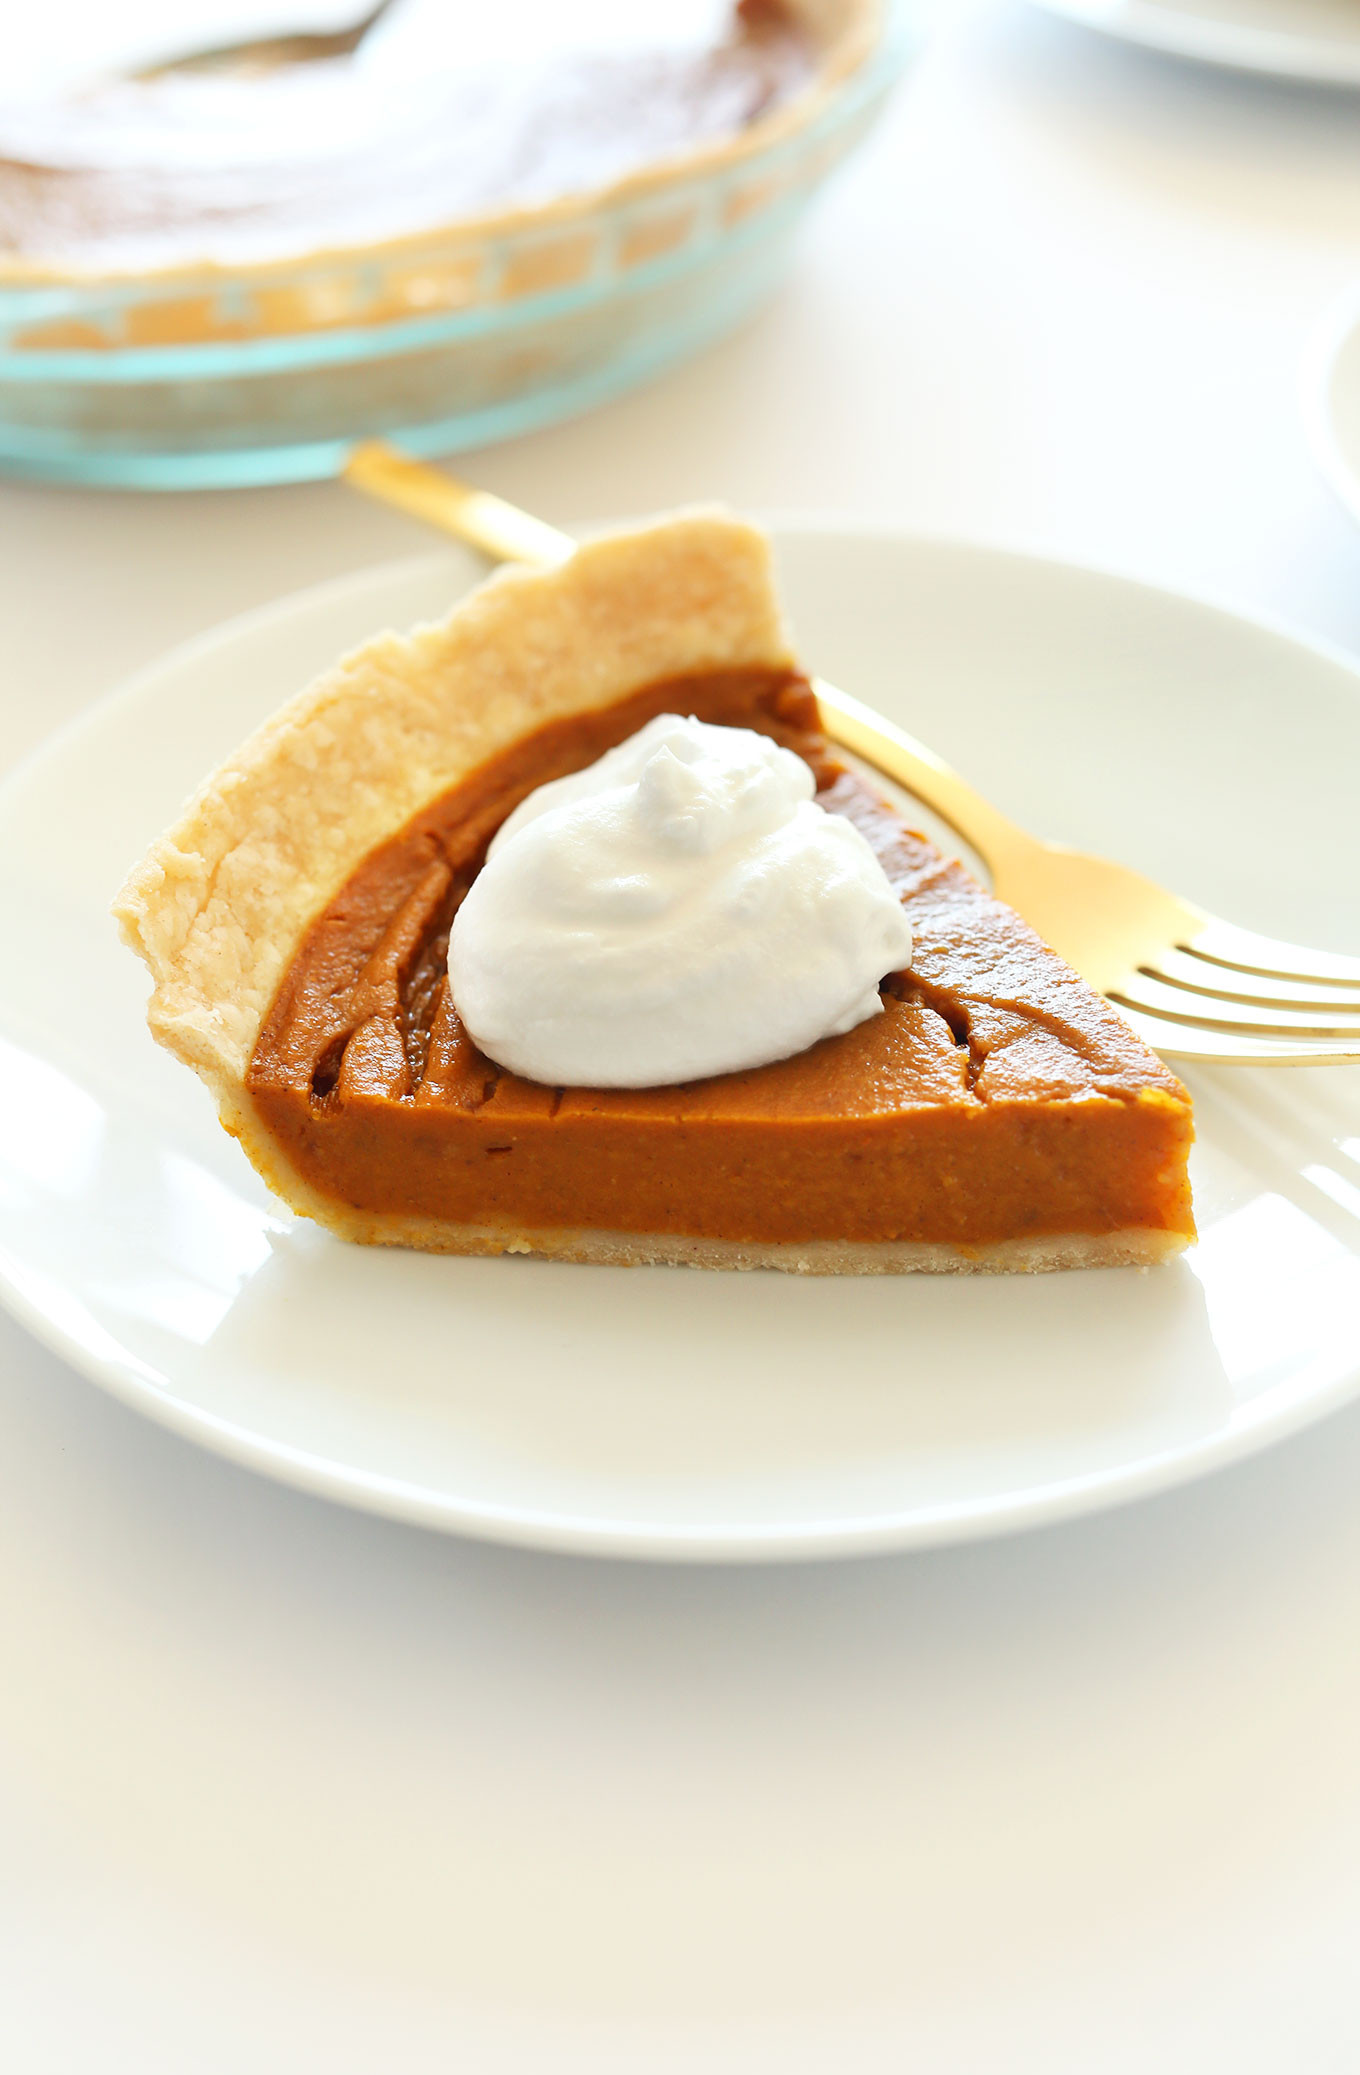 Vegan Pumpkin Pie Recipe
 7 Delicious Pie Recipes for Your Gluten Free Holiday Guests